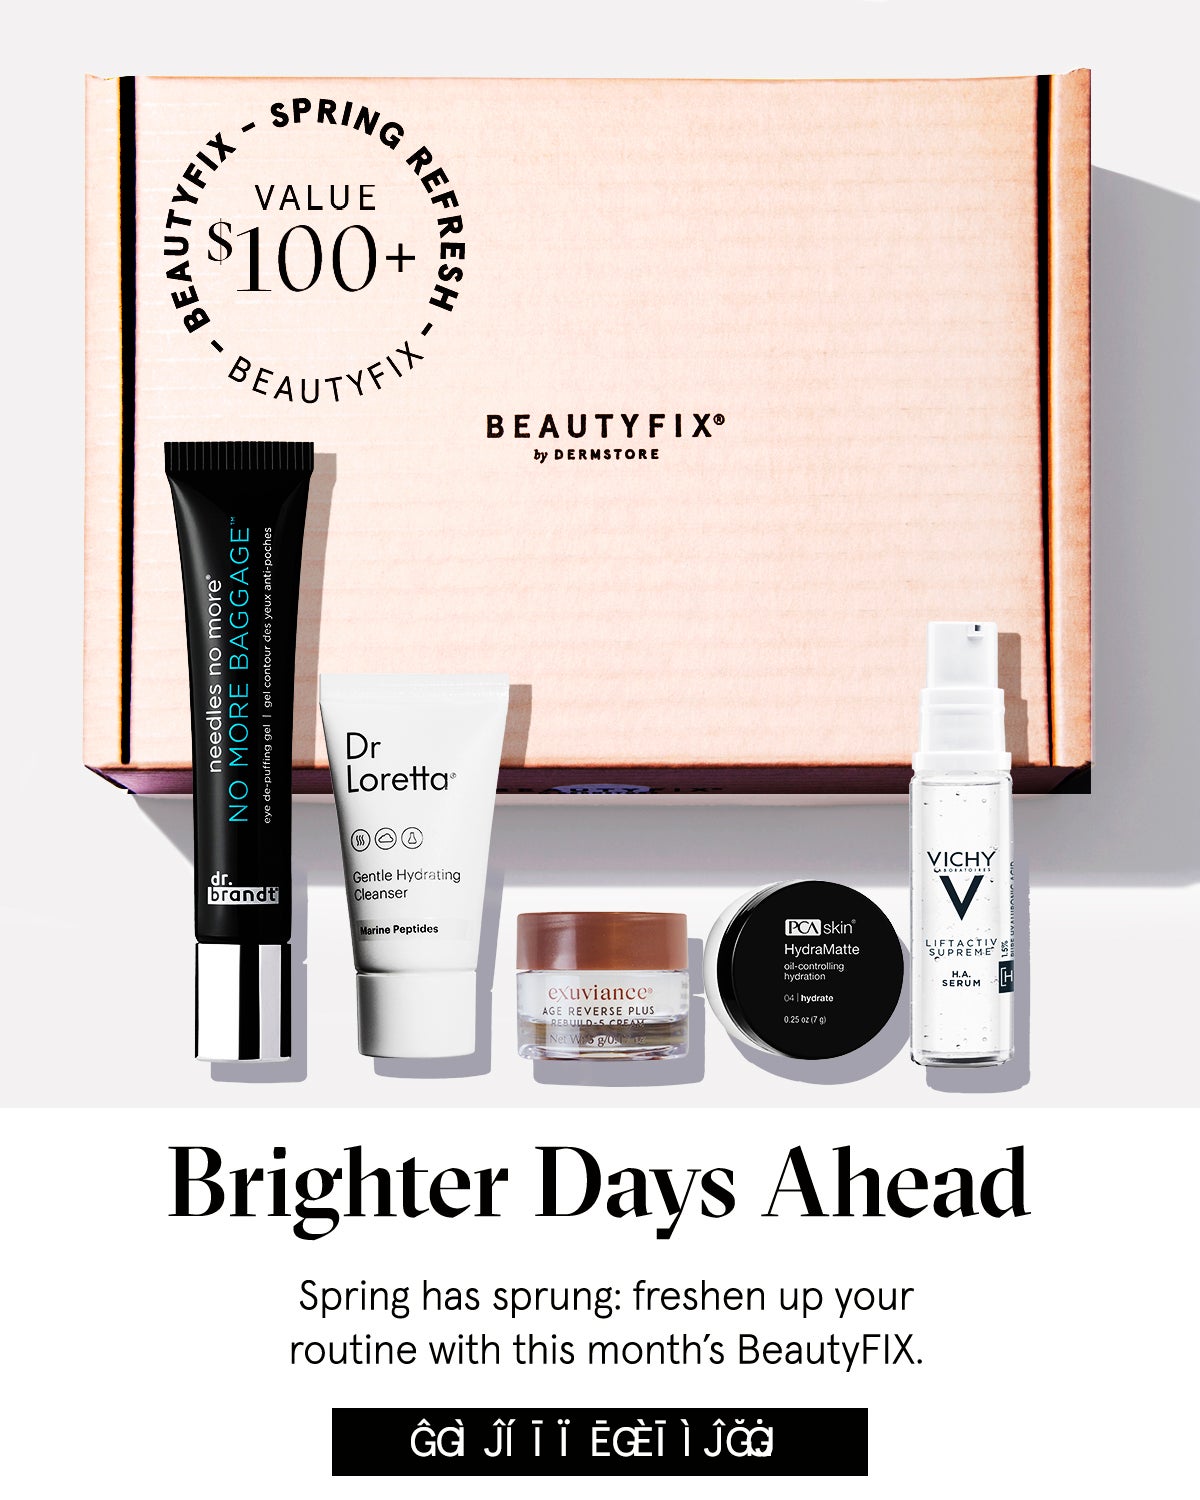 Brighter Days Ahead. Spring has sprung: freshen up your routine with this month's BeautyFIX. GET YOUR BEAUTYFIX